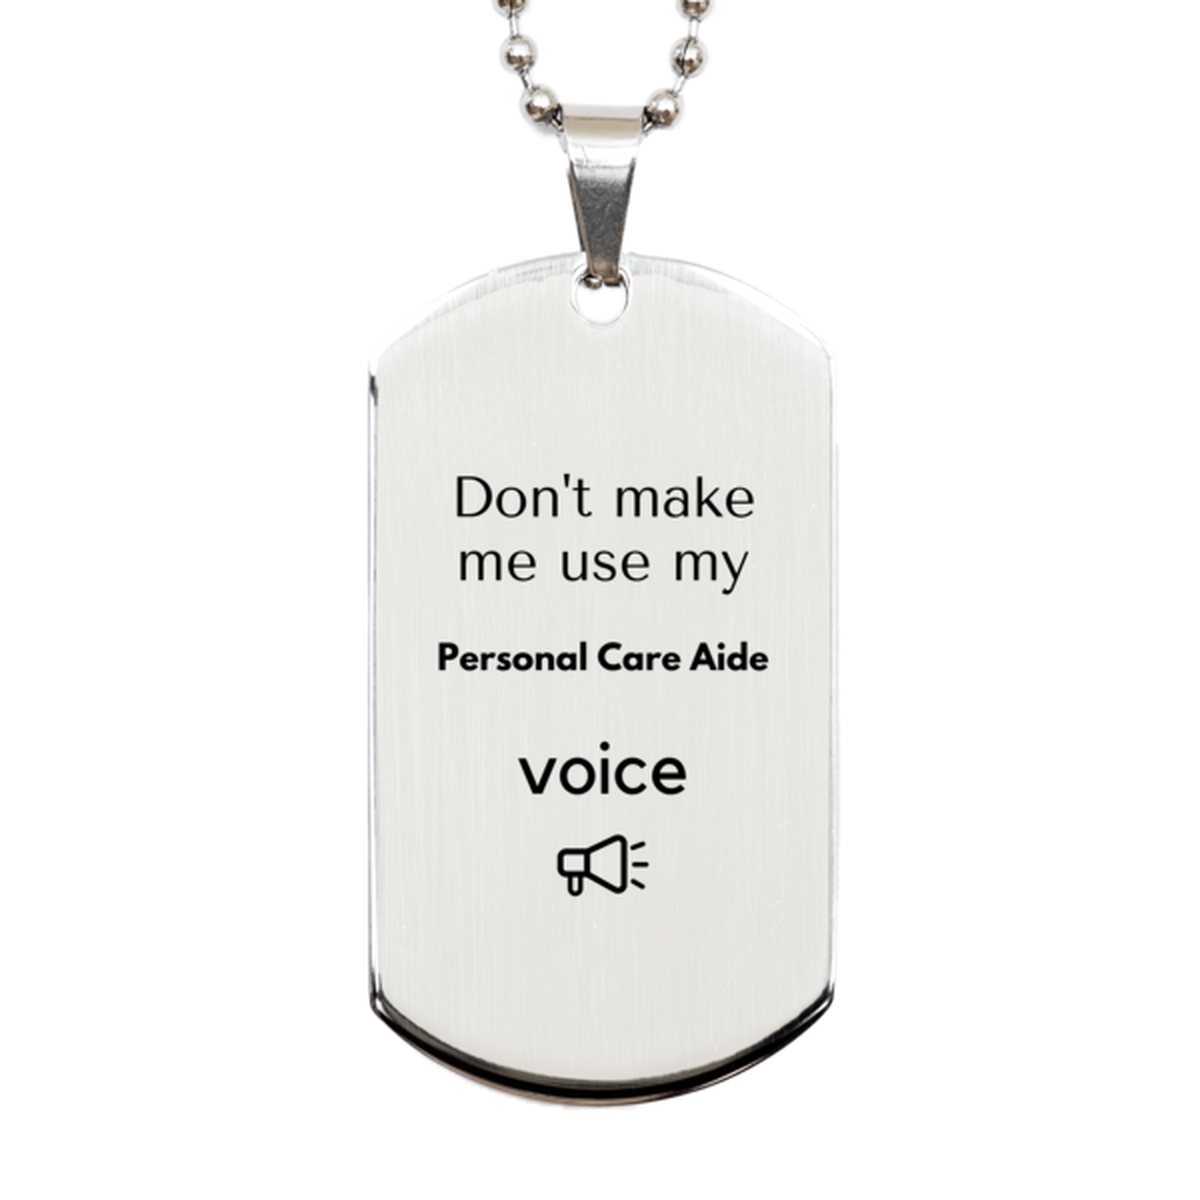 Don't make me use my Personal Care Aide voice, Sarcasm Personal Care Aide Gifts, Christmas Personal Care Aide Silver Dog Tag Birthday Unique Gifts For Personal Care Aide Coworkers, Men, Women, Colleague, Friends